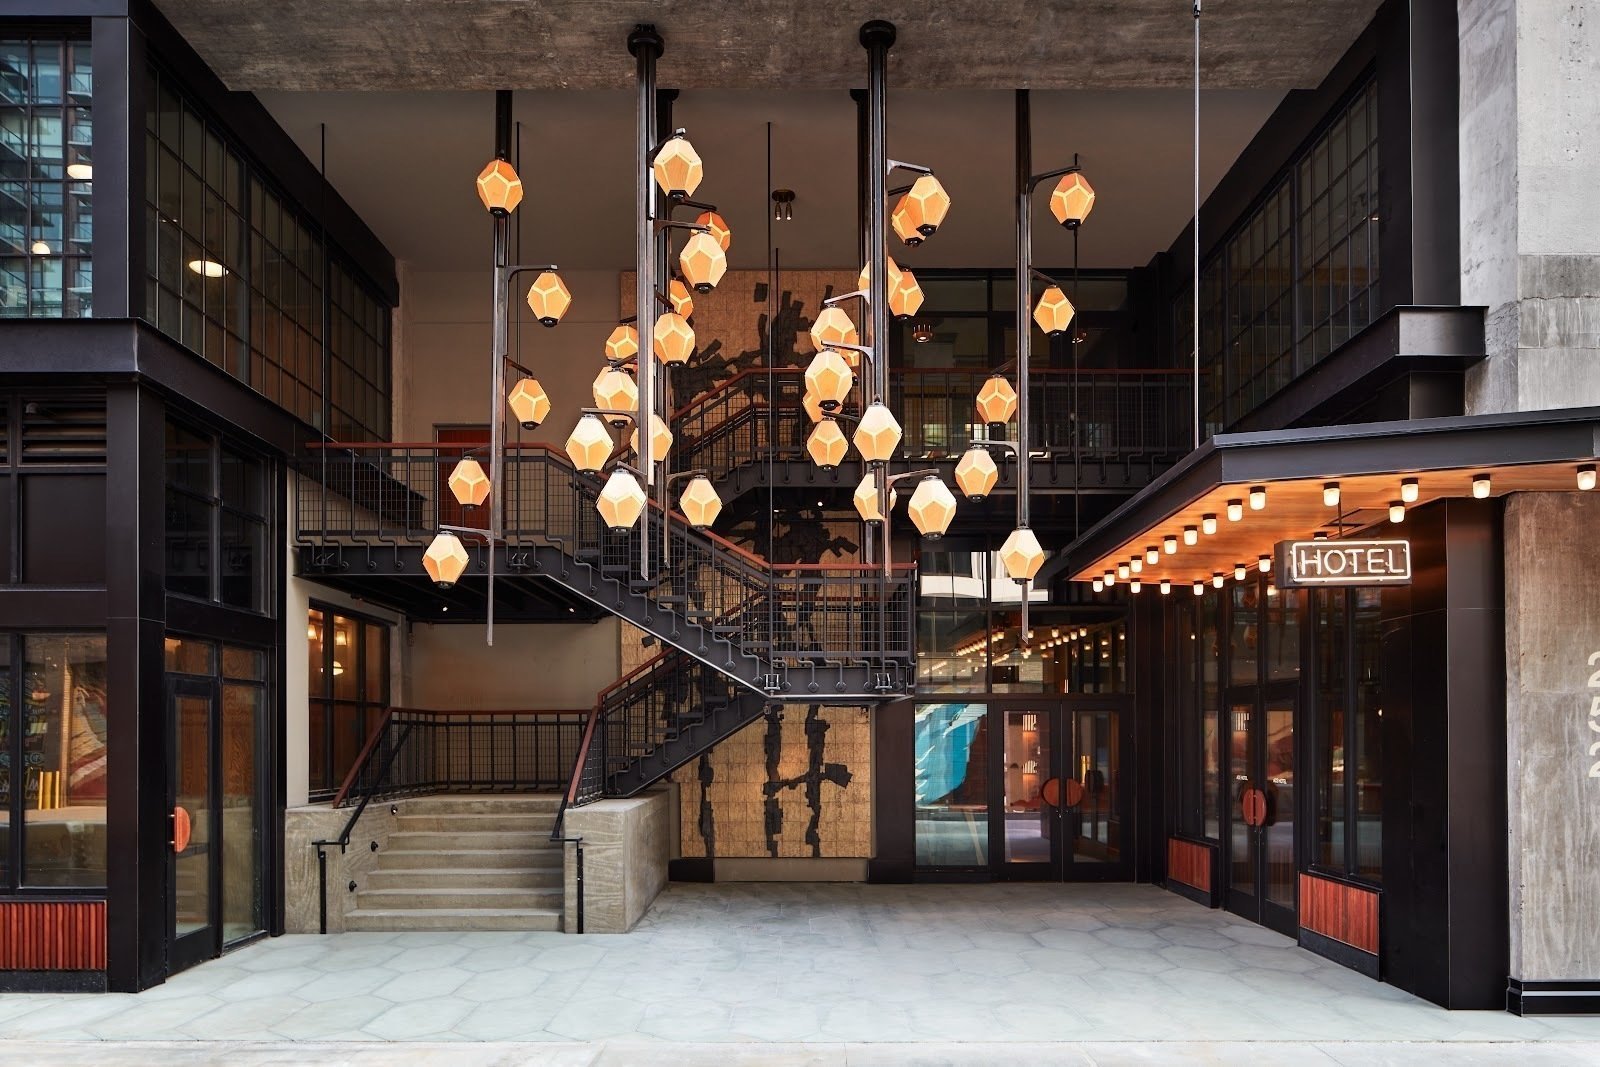 <span class="translation_missing" title="translation missing: en.meta.location_title, location_name: Ace Hotel Brooklyn, city: New York">Location Title</span>